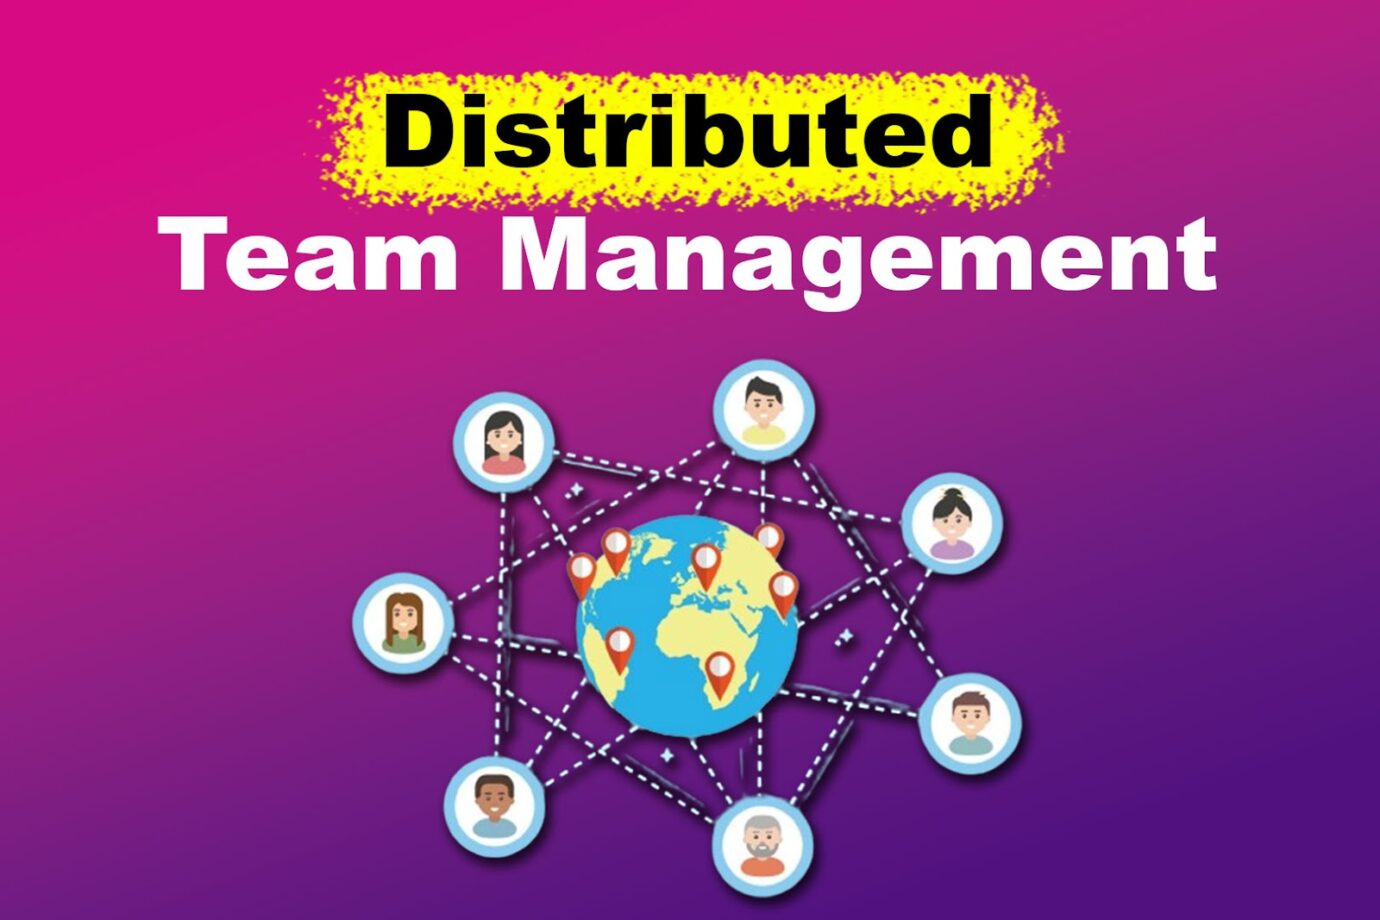 Distributed Team Management